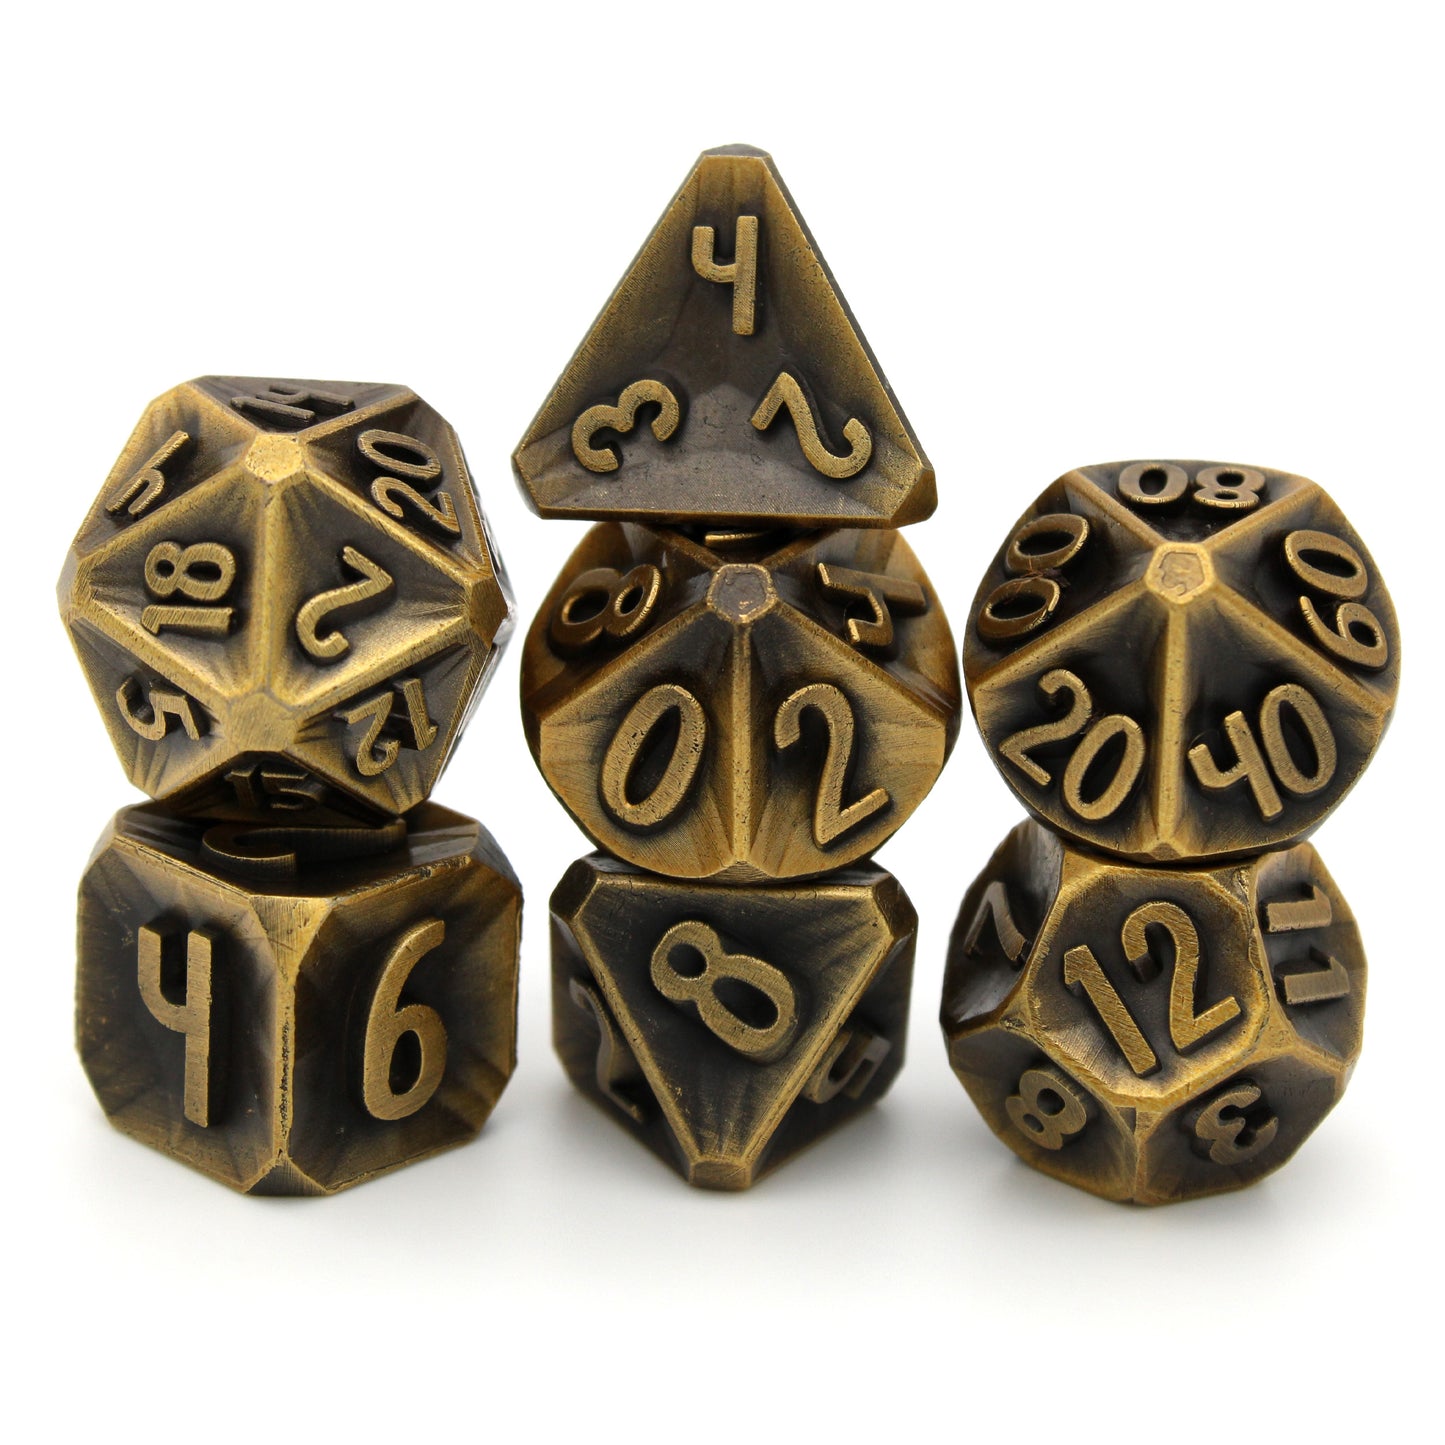 Oath of the Ancients is a 7-piece custom metal set cast in aged bronze.